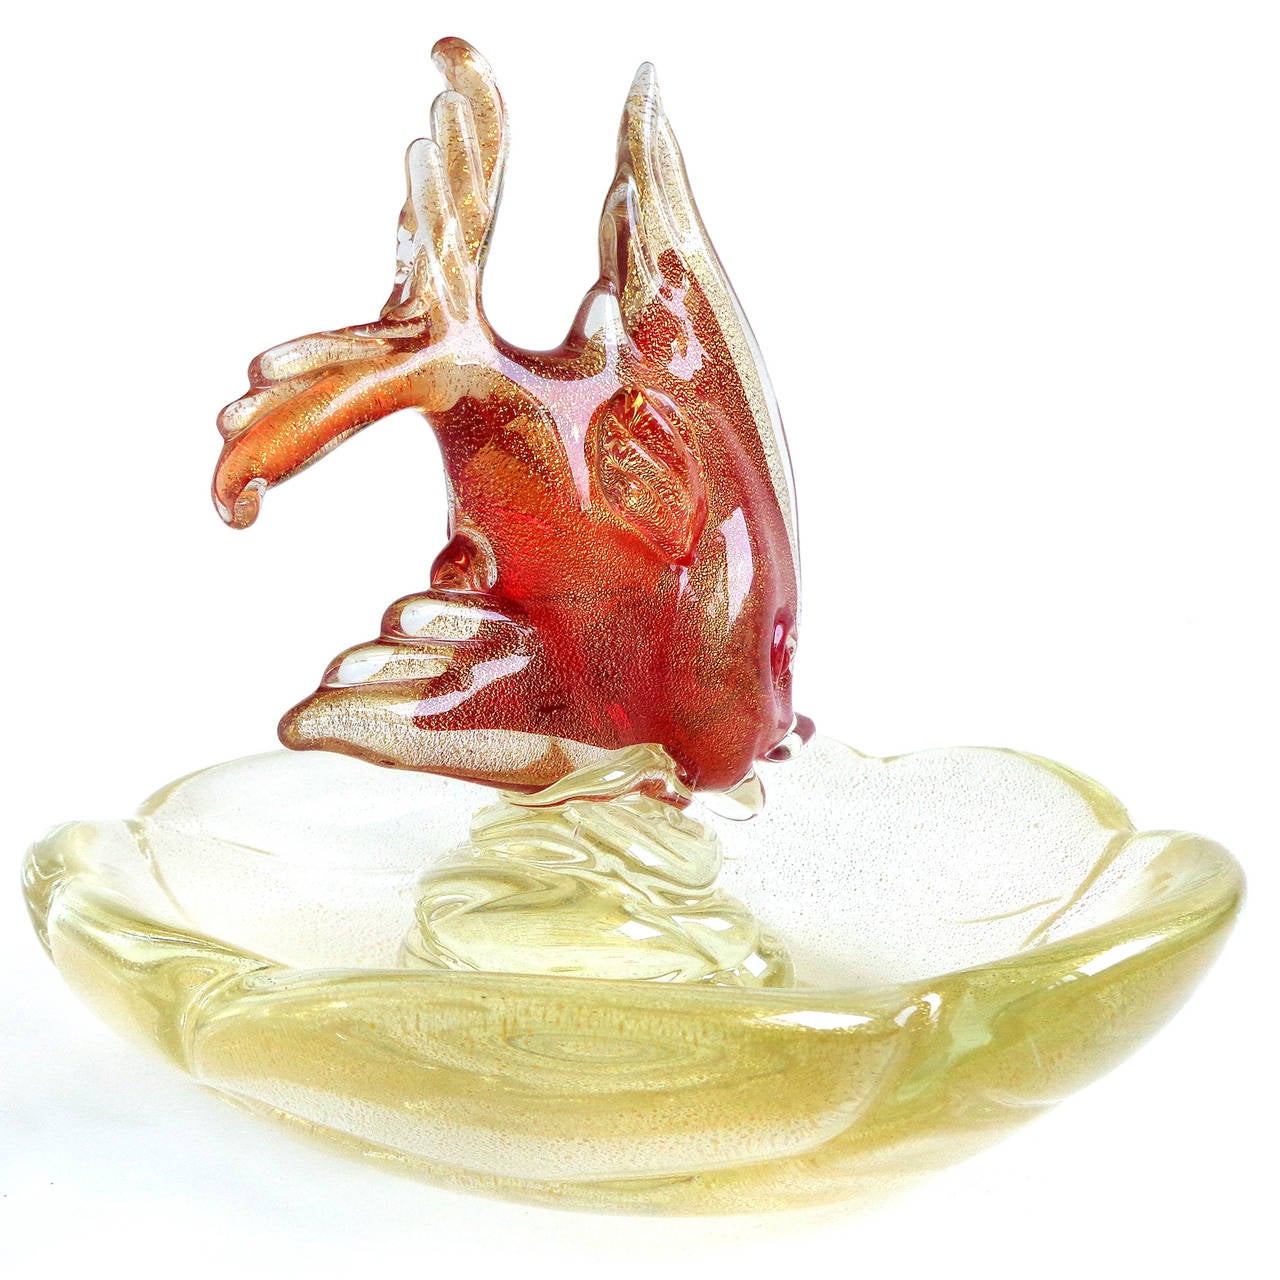 Free shipping worldwide! See details below description.

Incredible Murano handblown gold flecked art glass fish on bowl. Documented to designer Archimede Seguso. The fish figure is very well detailed, as you can see from its face and fins. The